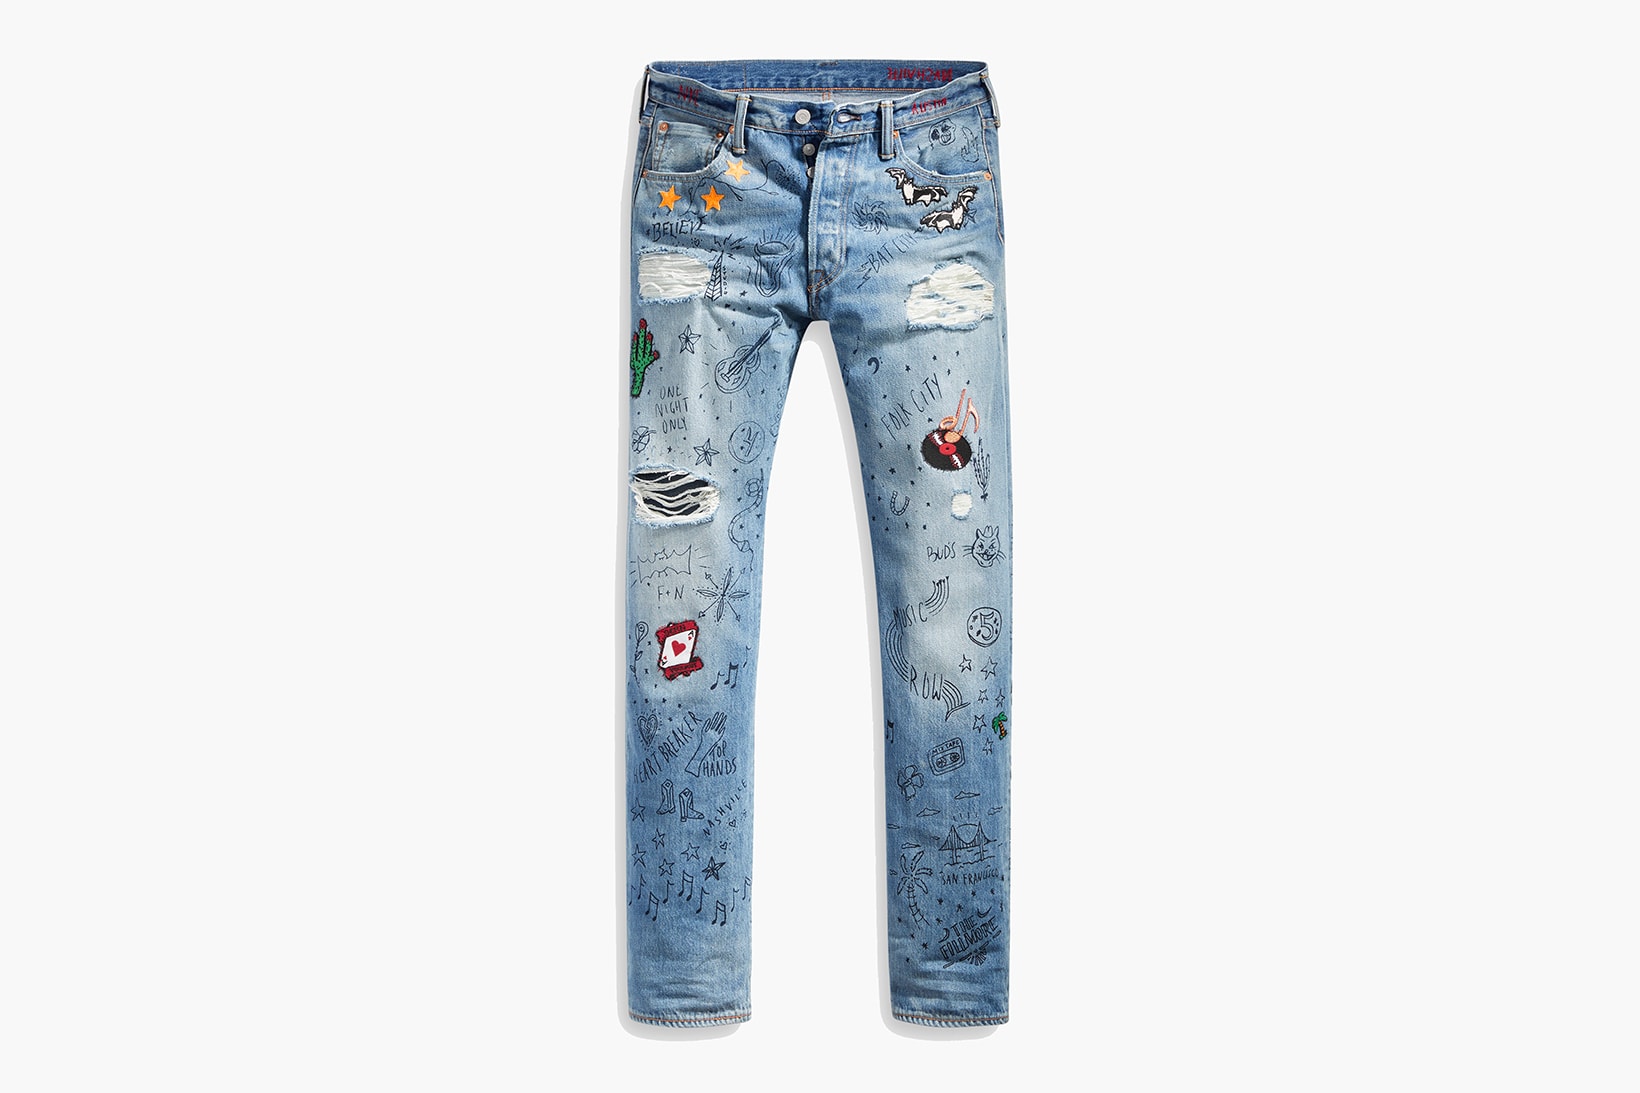 Levi's Release Capsule Collection to Celebrate 501 Day Jeans